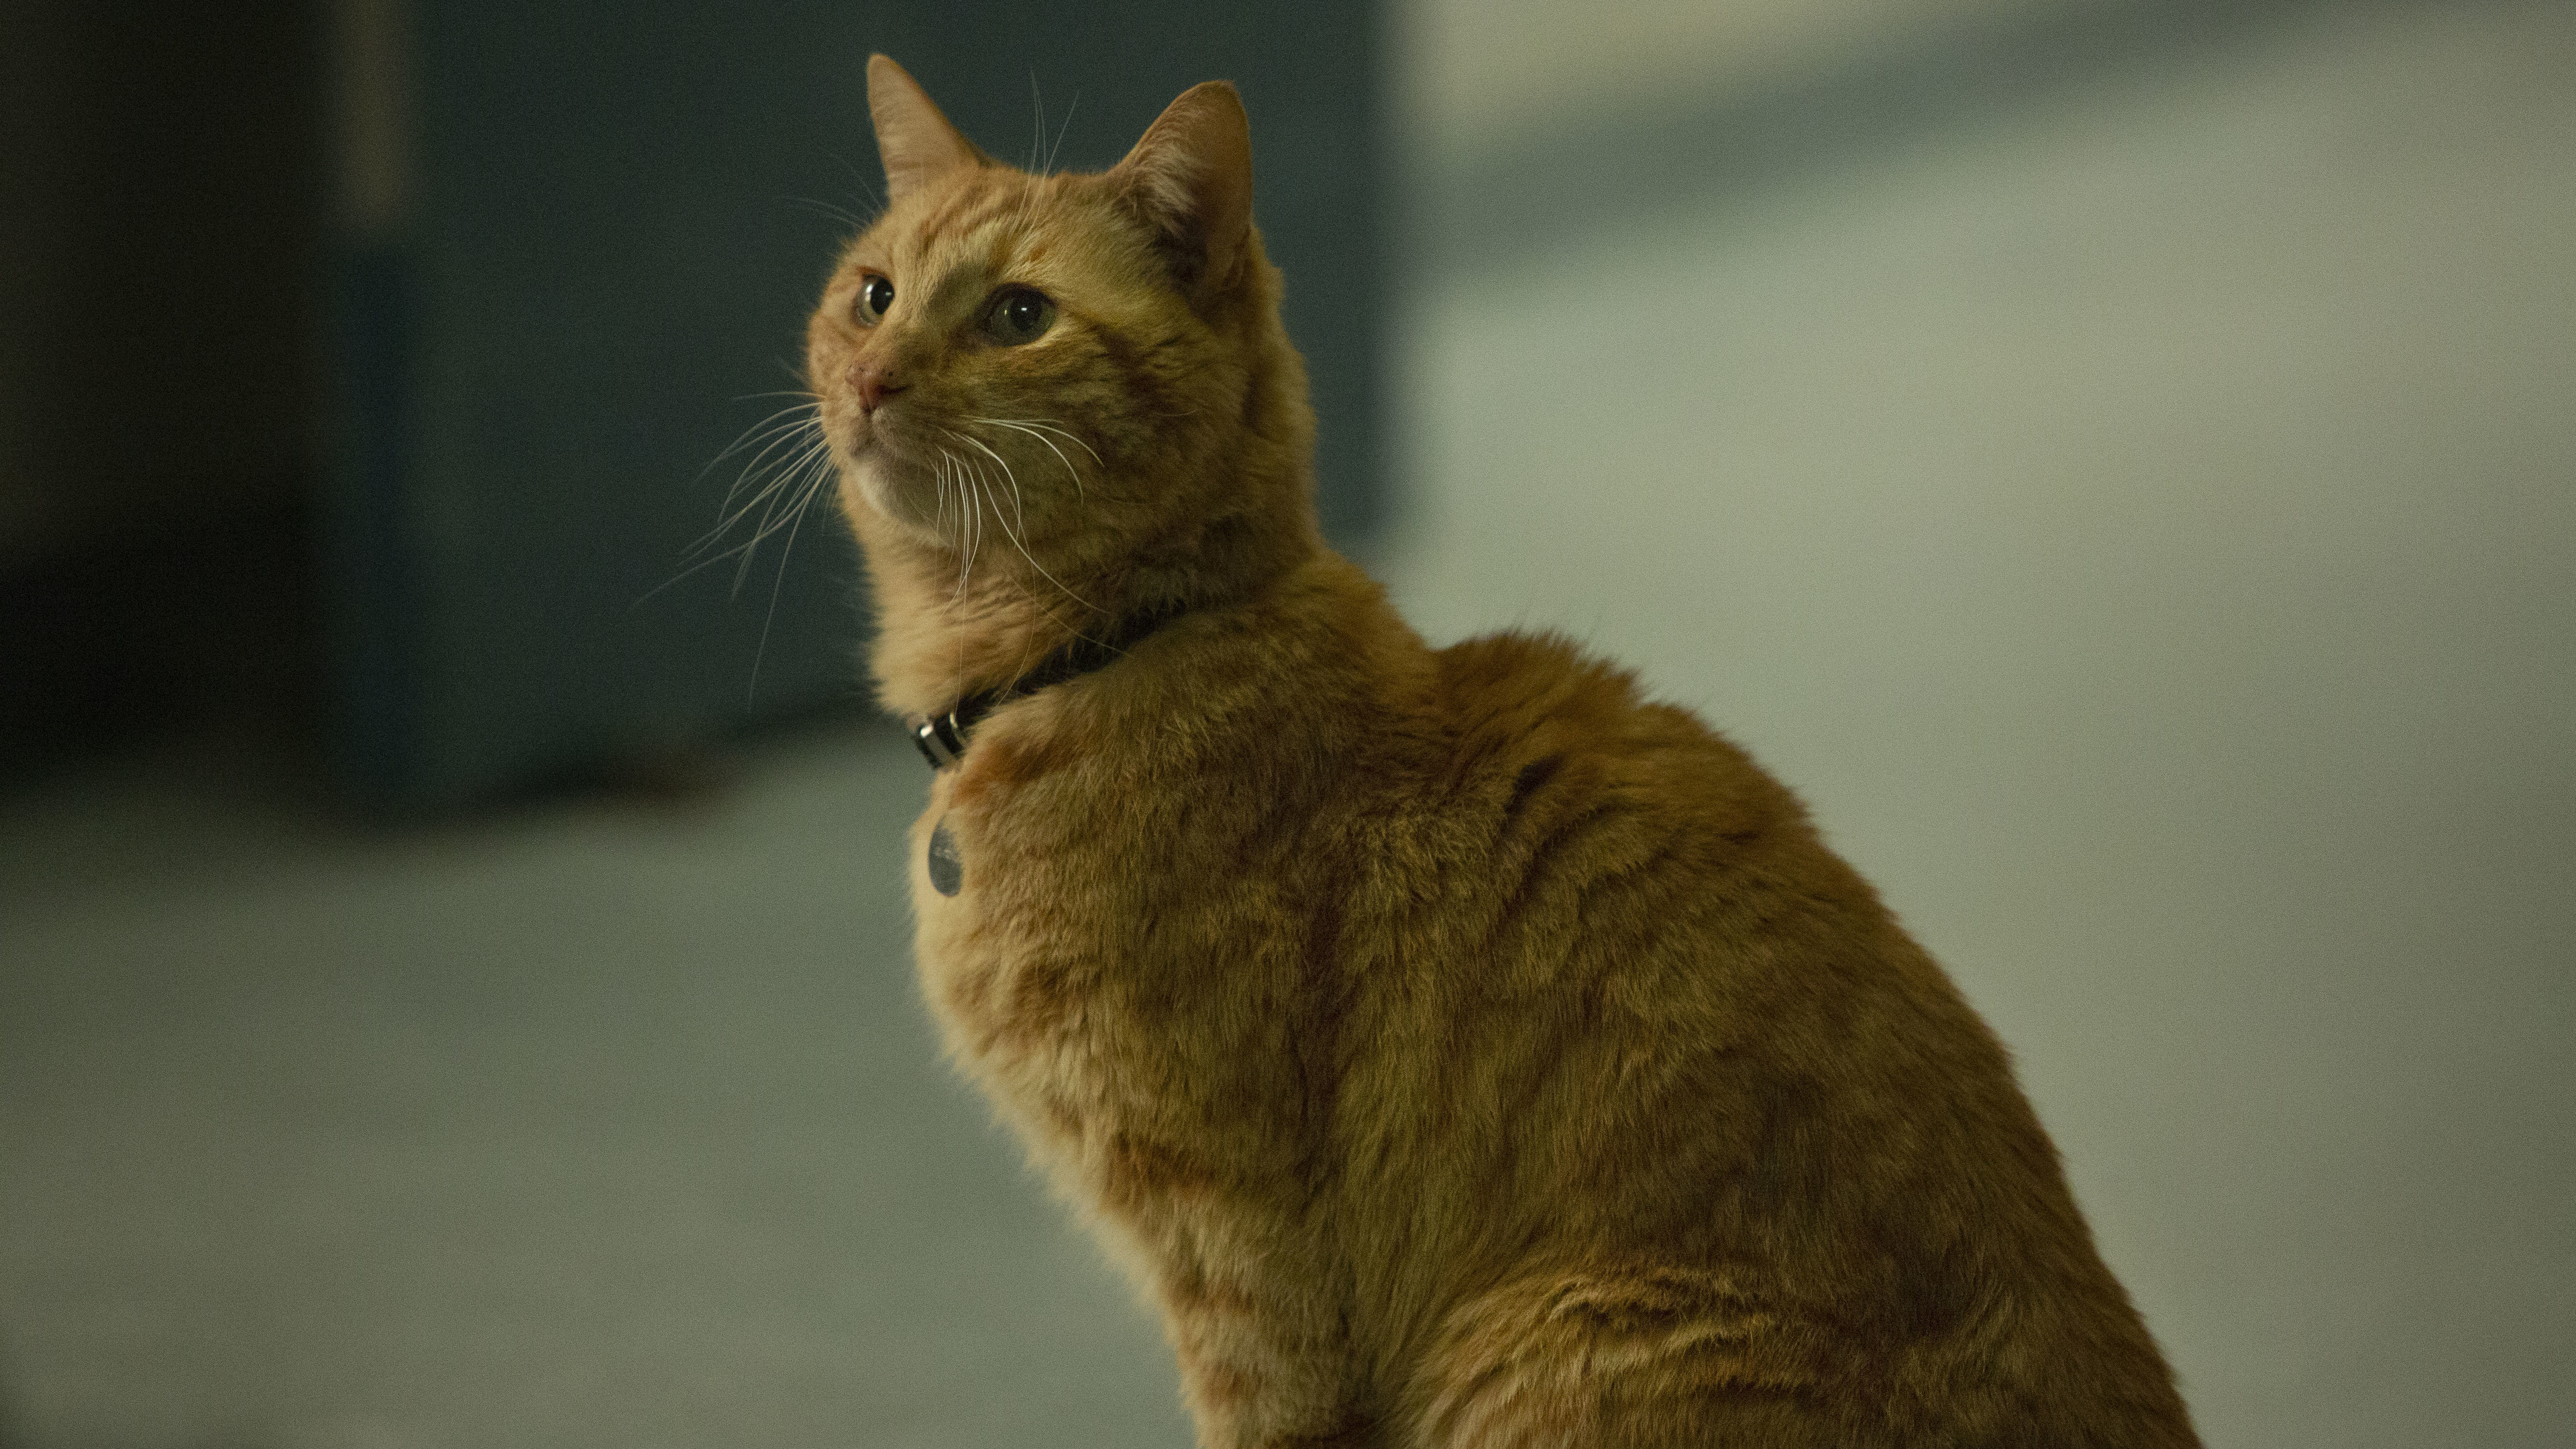 goose the cat in captain marvel 2019 4k 1553074128 - Goose The Cat In Captain Marvel 2019 4k - movies wallpapers, hd-wallpapers, captain marvel wallpapers, 5k wallpapers, 4k-wallpapers, 2019 movies wallpapers